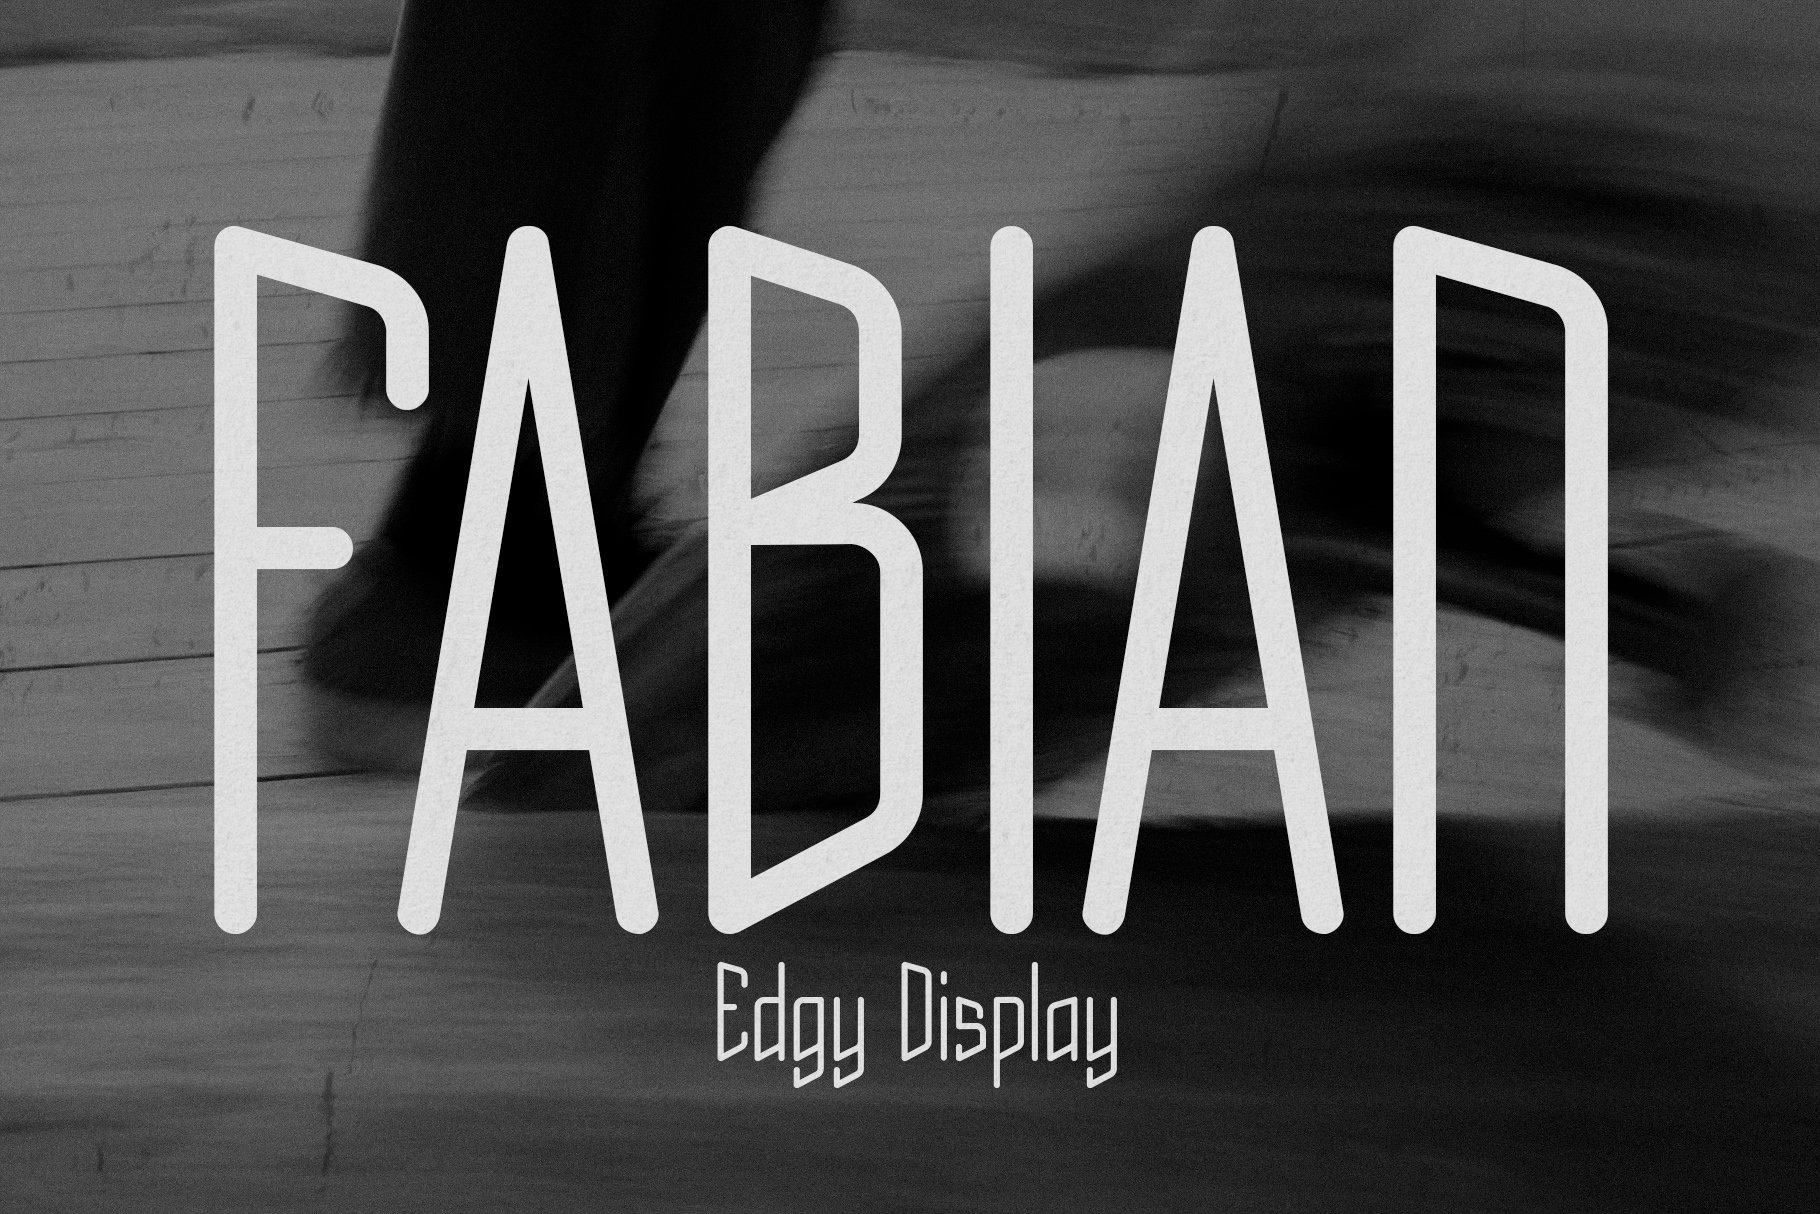 Fabian - Edgy Punk Display cover image.